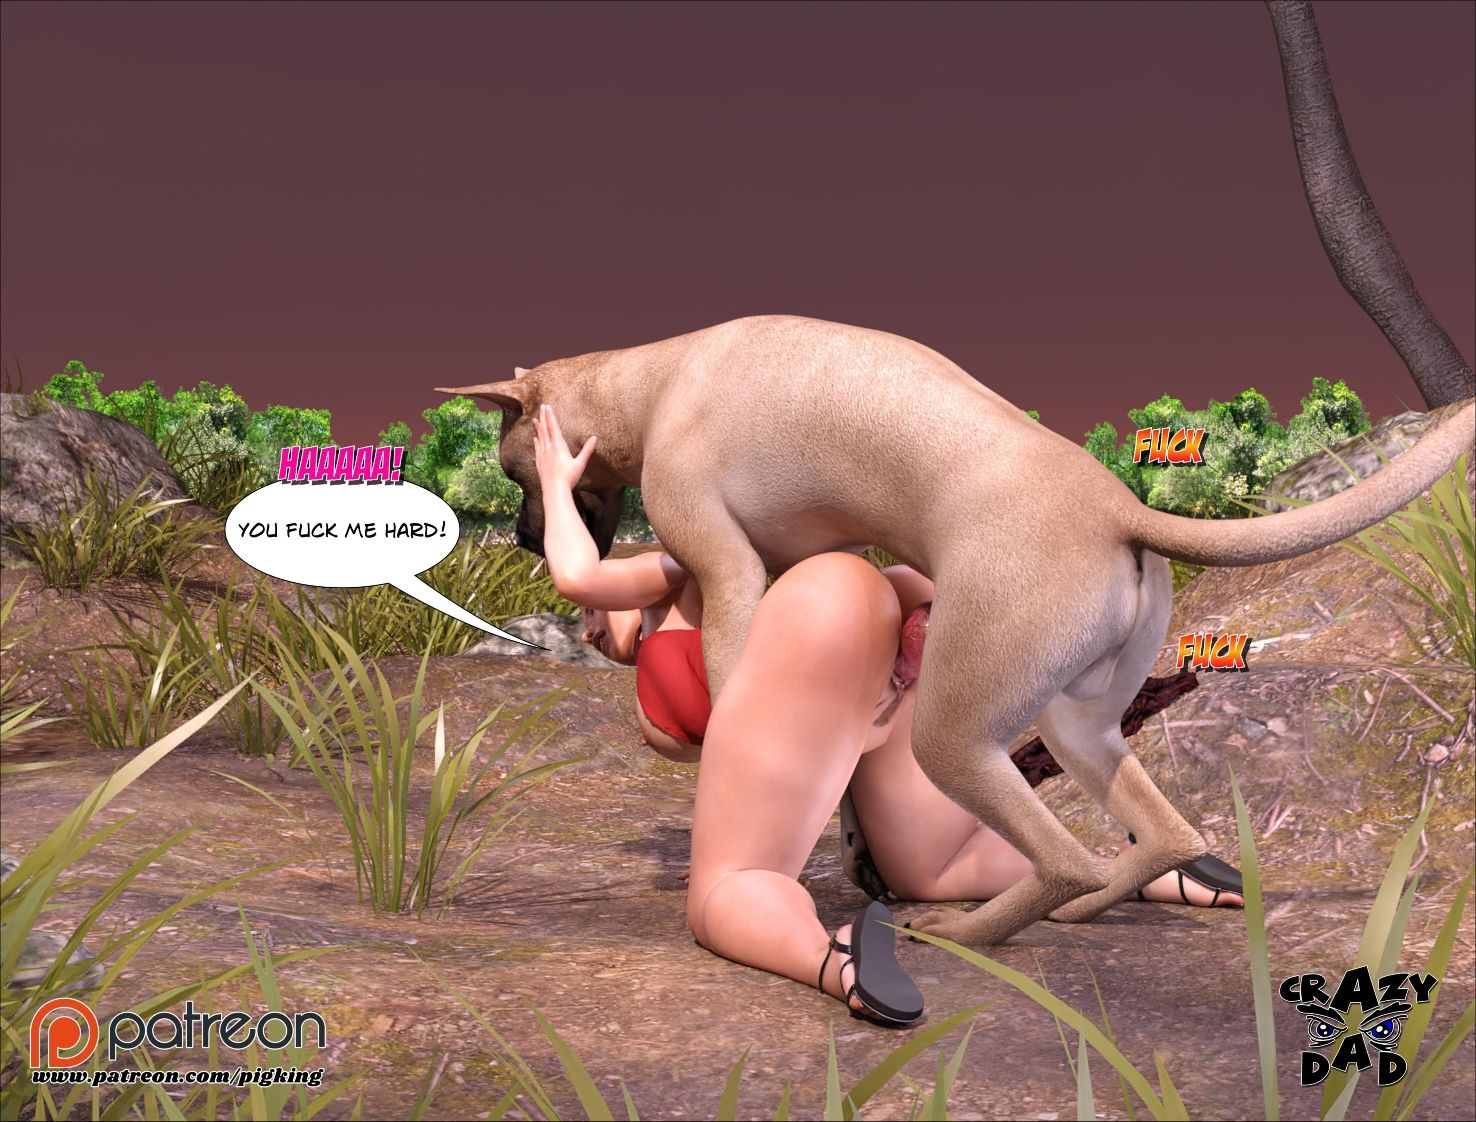 Father-in-Law at Home 38 – CrazyDad3D